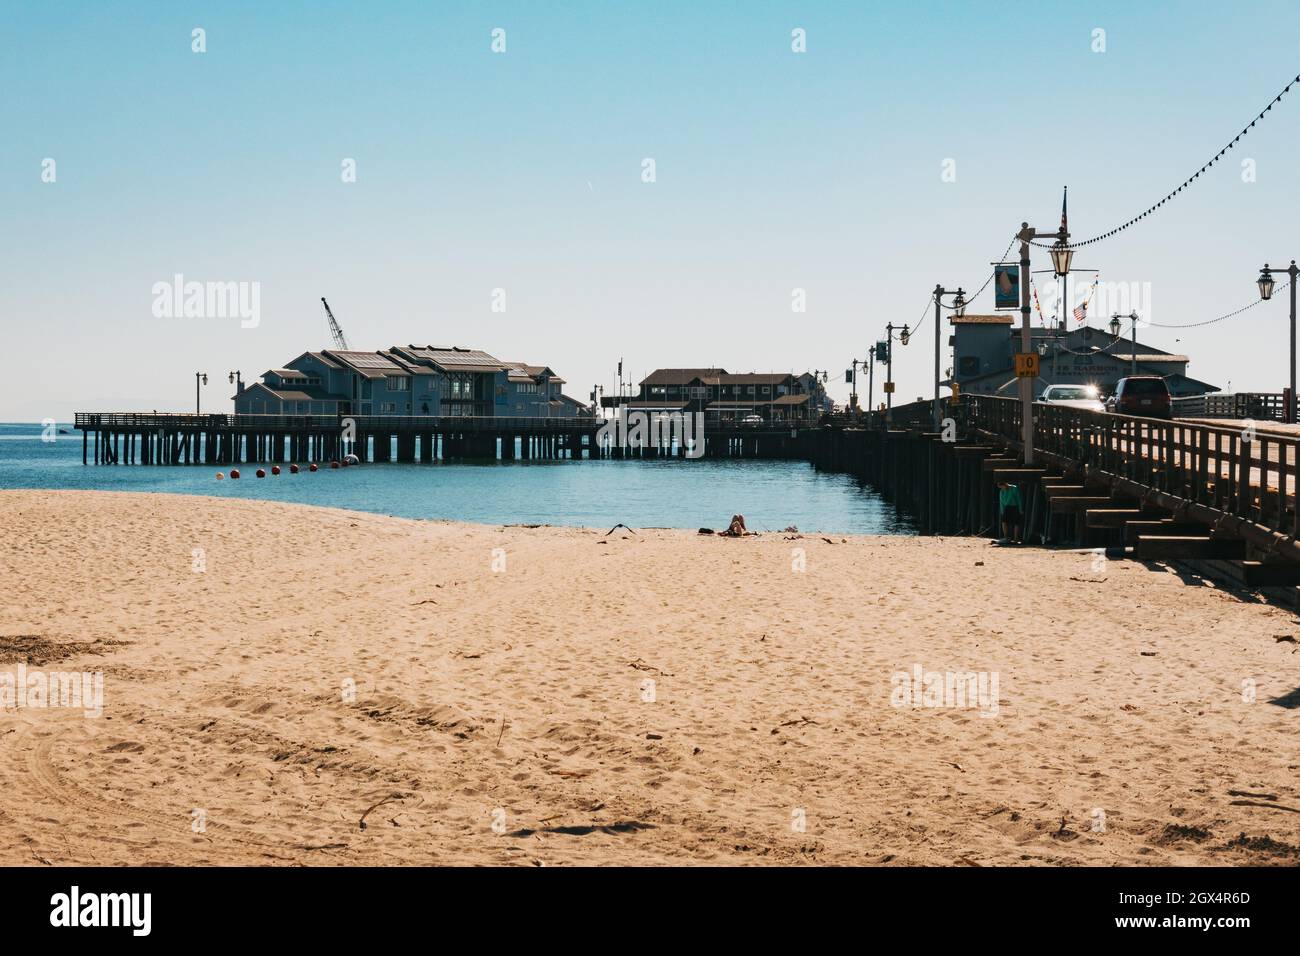 Stearns Wharf in Santa Barbara, CA - an historic wooden pier featuring shops and restaurants Stock Photo